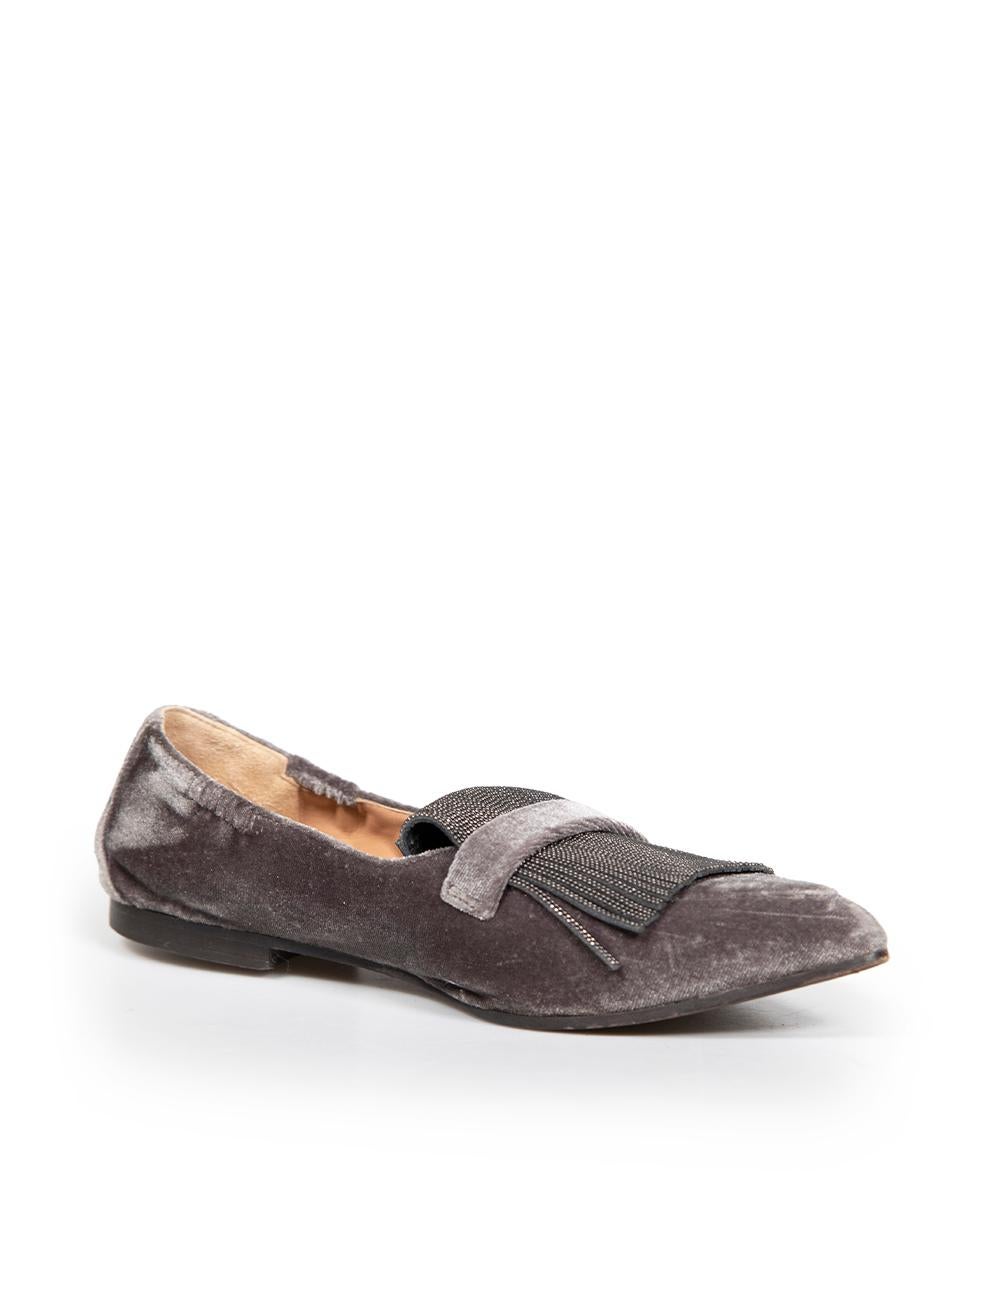 CONDITION is Good. Minor wear to flats is evident. Light abrasions to toe points and wear to soles on this used Brunello Cucinelli designer resale item.
 
 
 
 Details
 
 
 Grey
 
 Velvet
 
 Slip on loafers
 
 Beaded tassel accent
 
 Pointed toe
 
